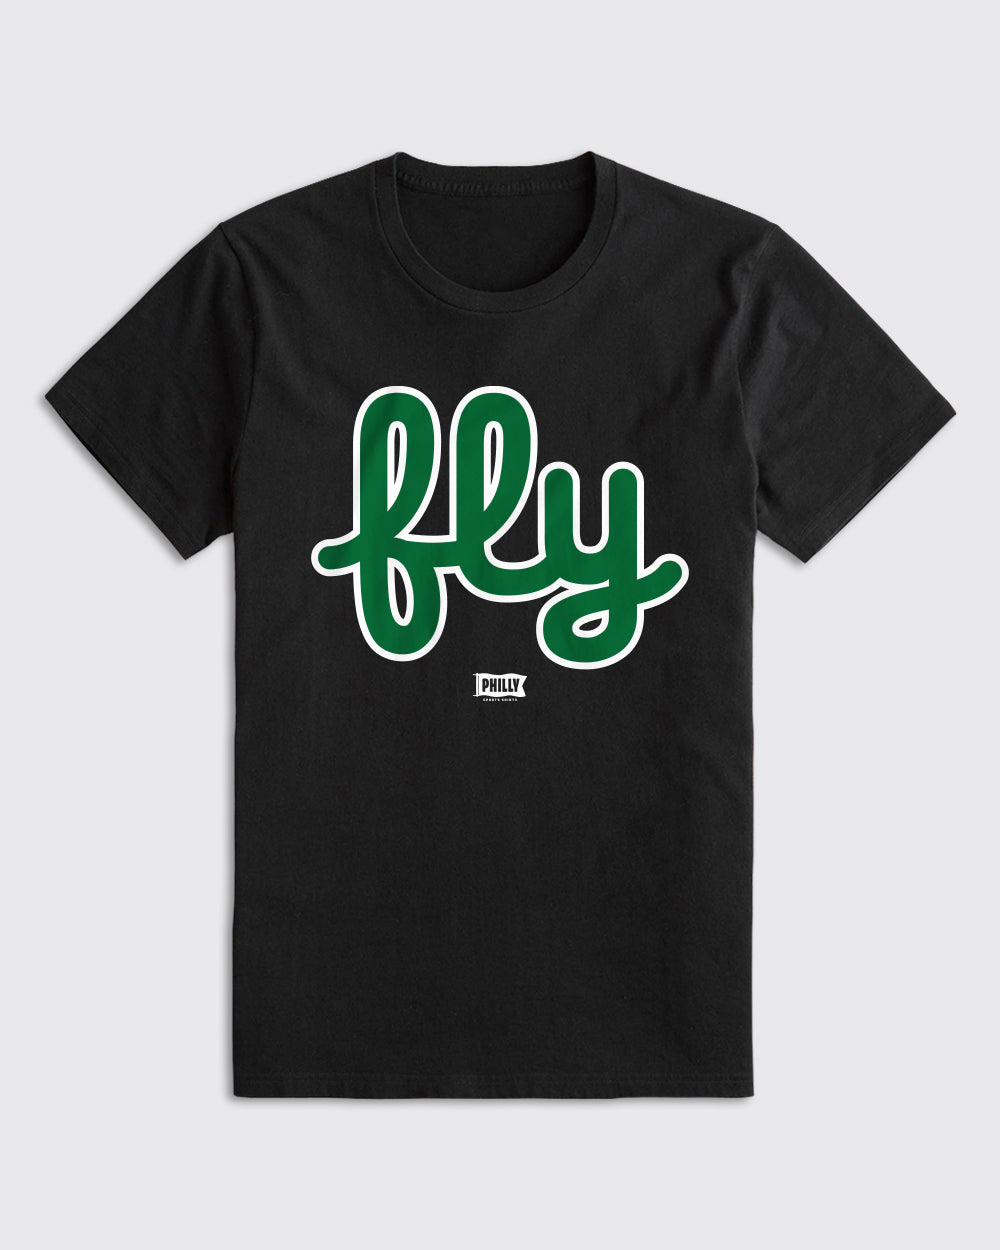 Eagles Fly Shirt - Eagles, T-Shirts - Philly Sports Shirts